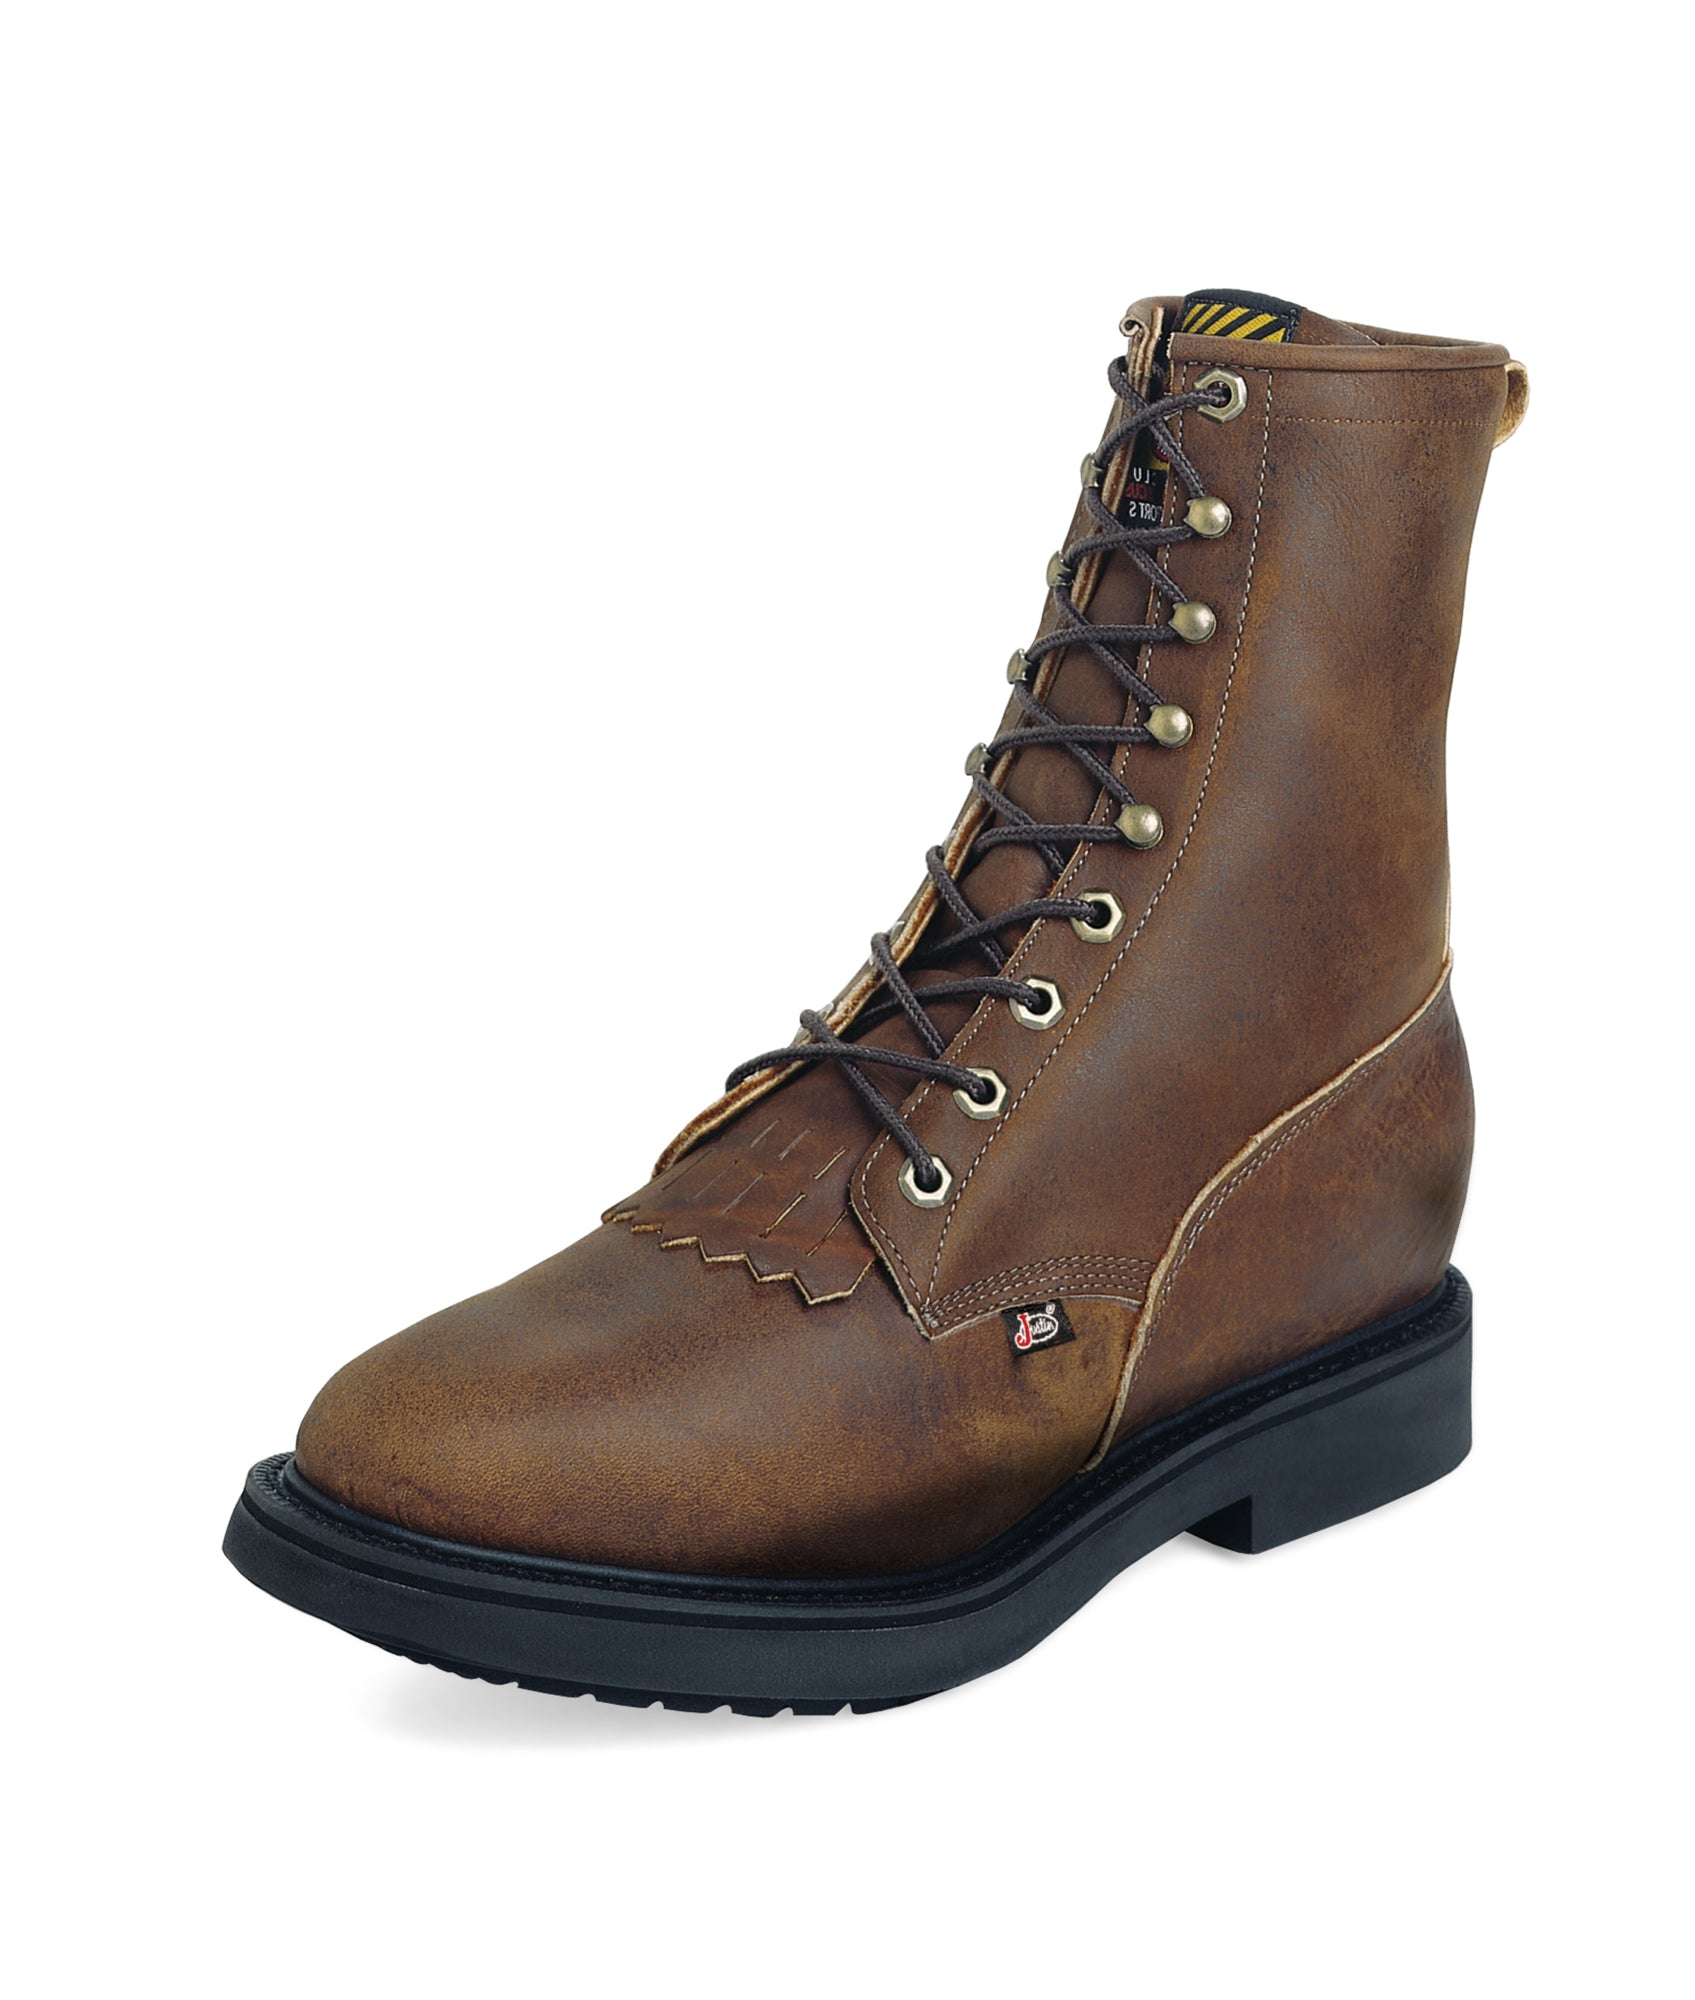 comfortable lace up work boots